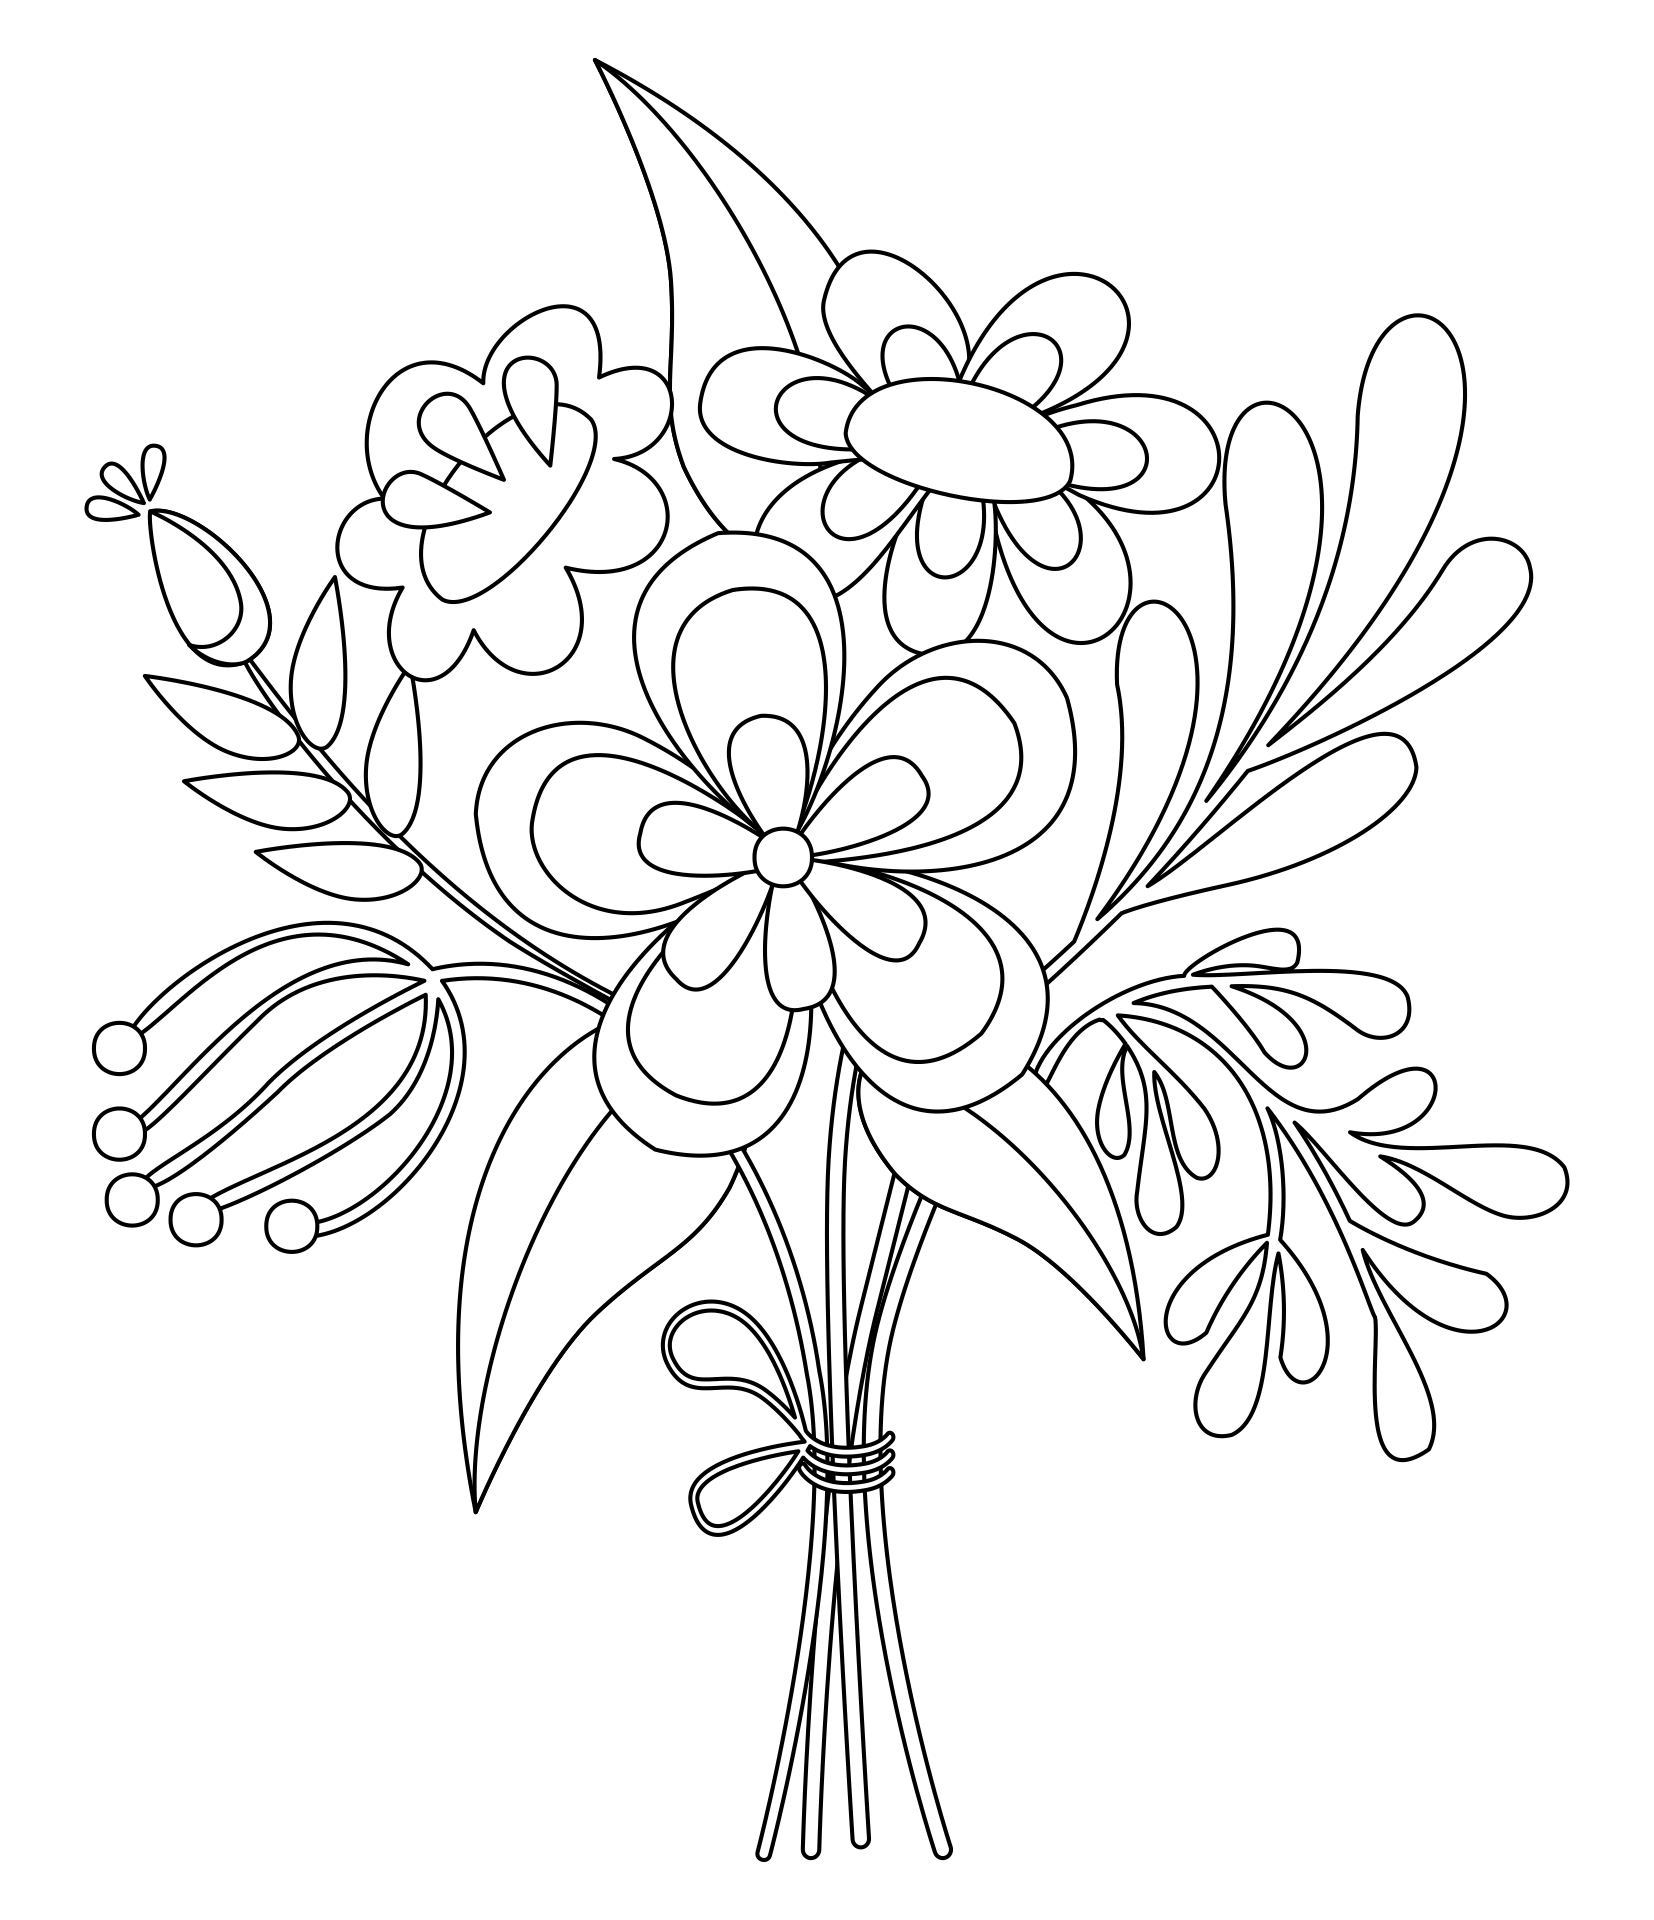 Floral Bouquet Embroidery Pattern